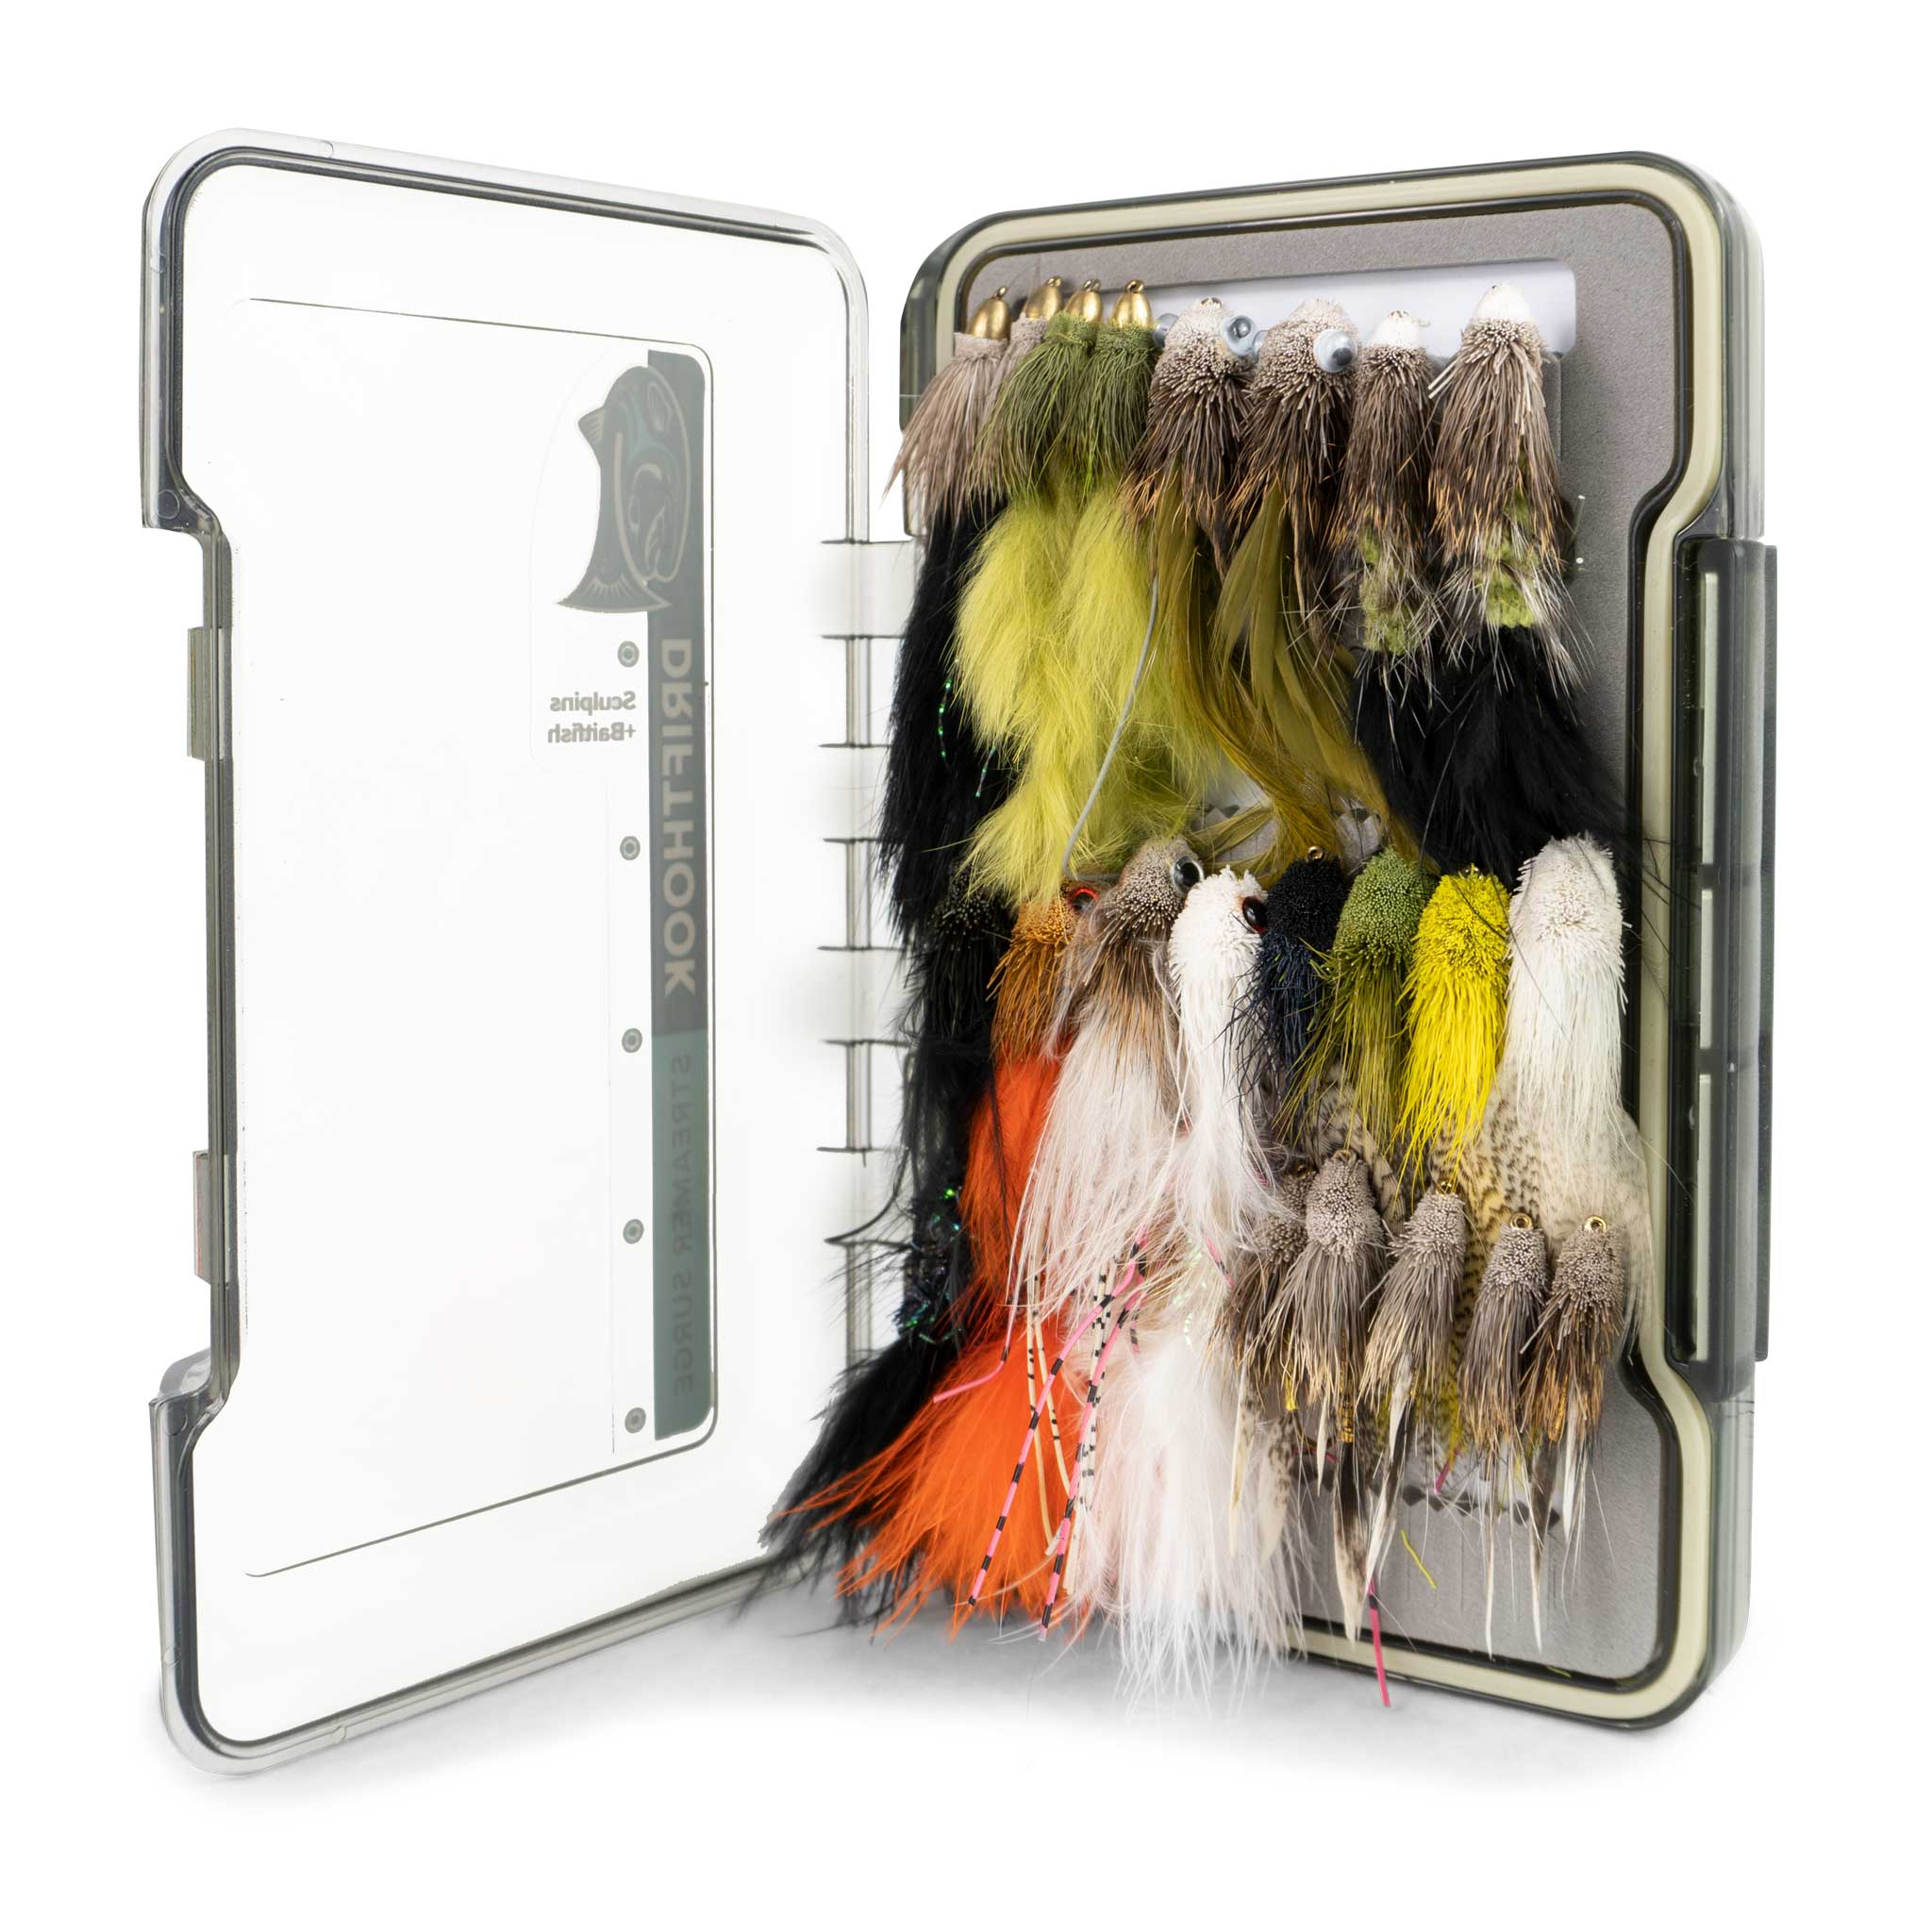 YAZHIDA Fly Fishing Flies Kit Fly Assortment Trout Bass Fishing with Fly  Box, with Dry/Wet Flies, Nymphs, Streamers,Fly Poppers